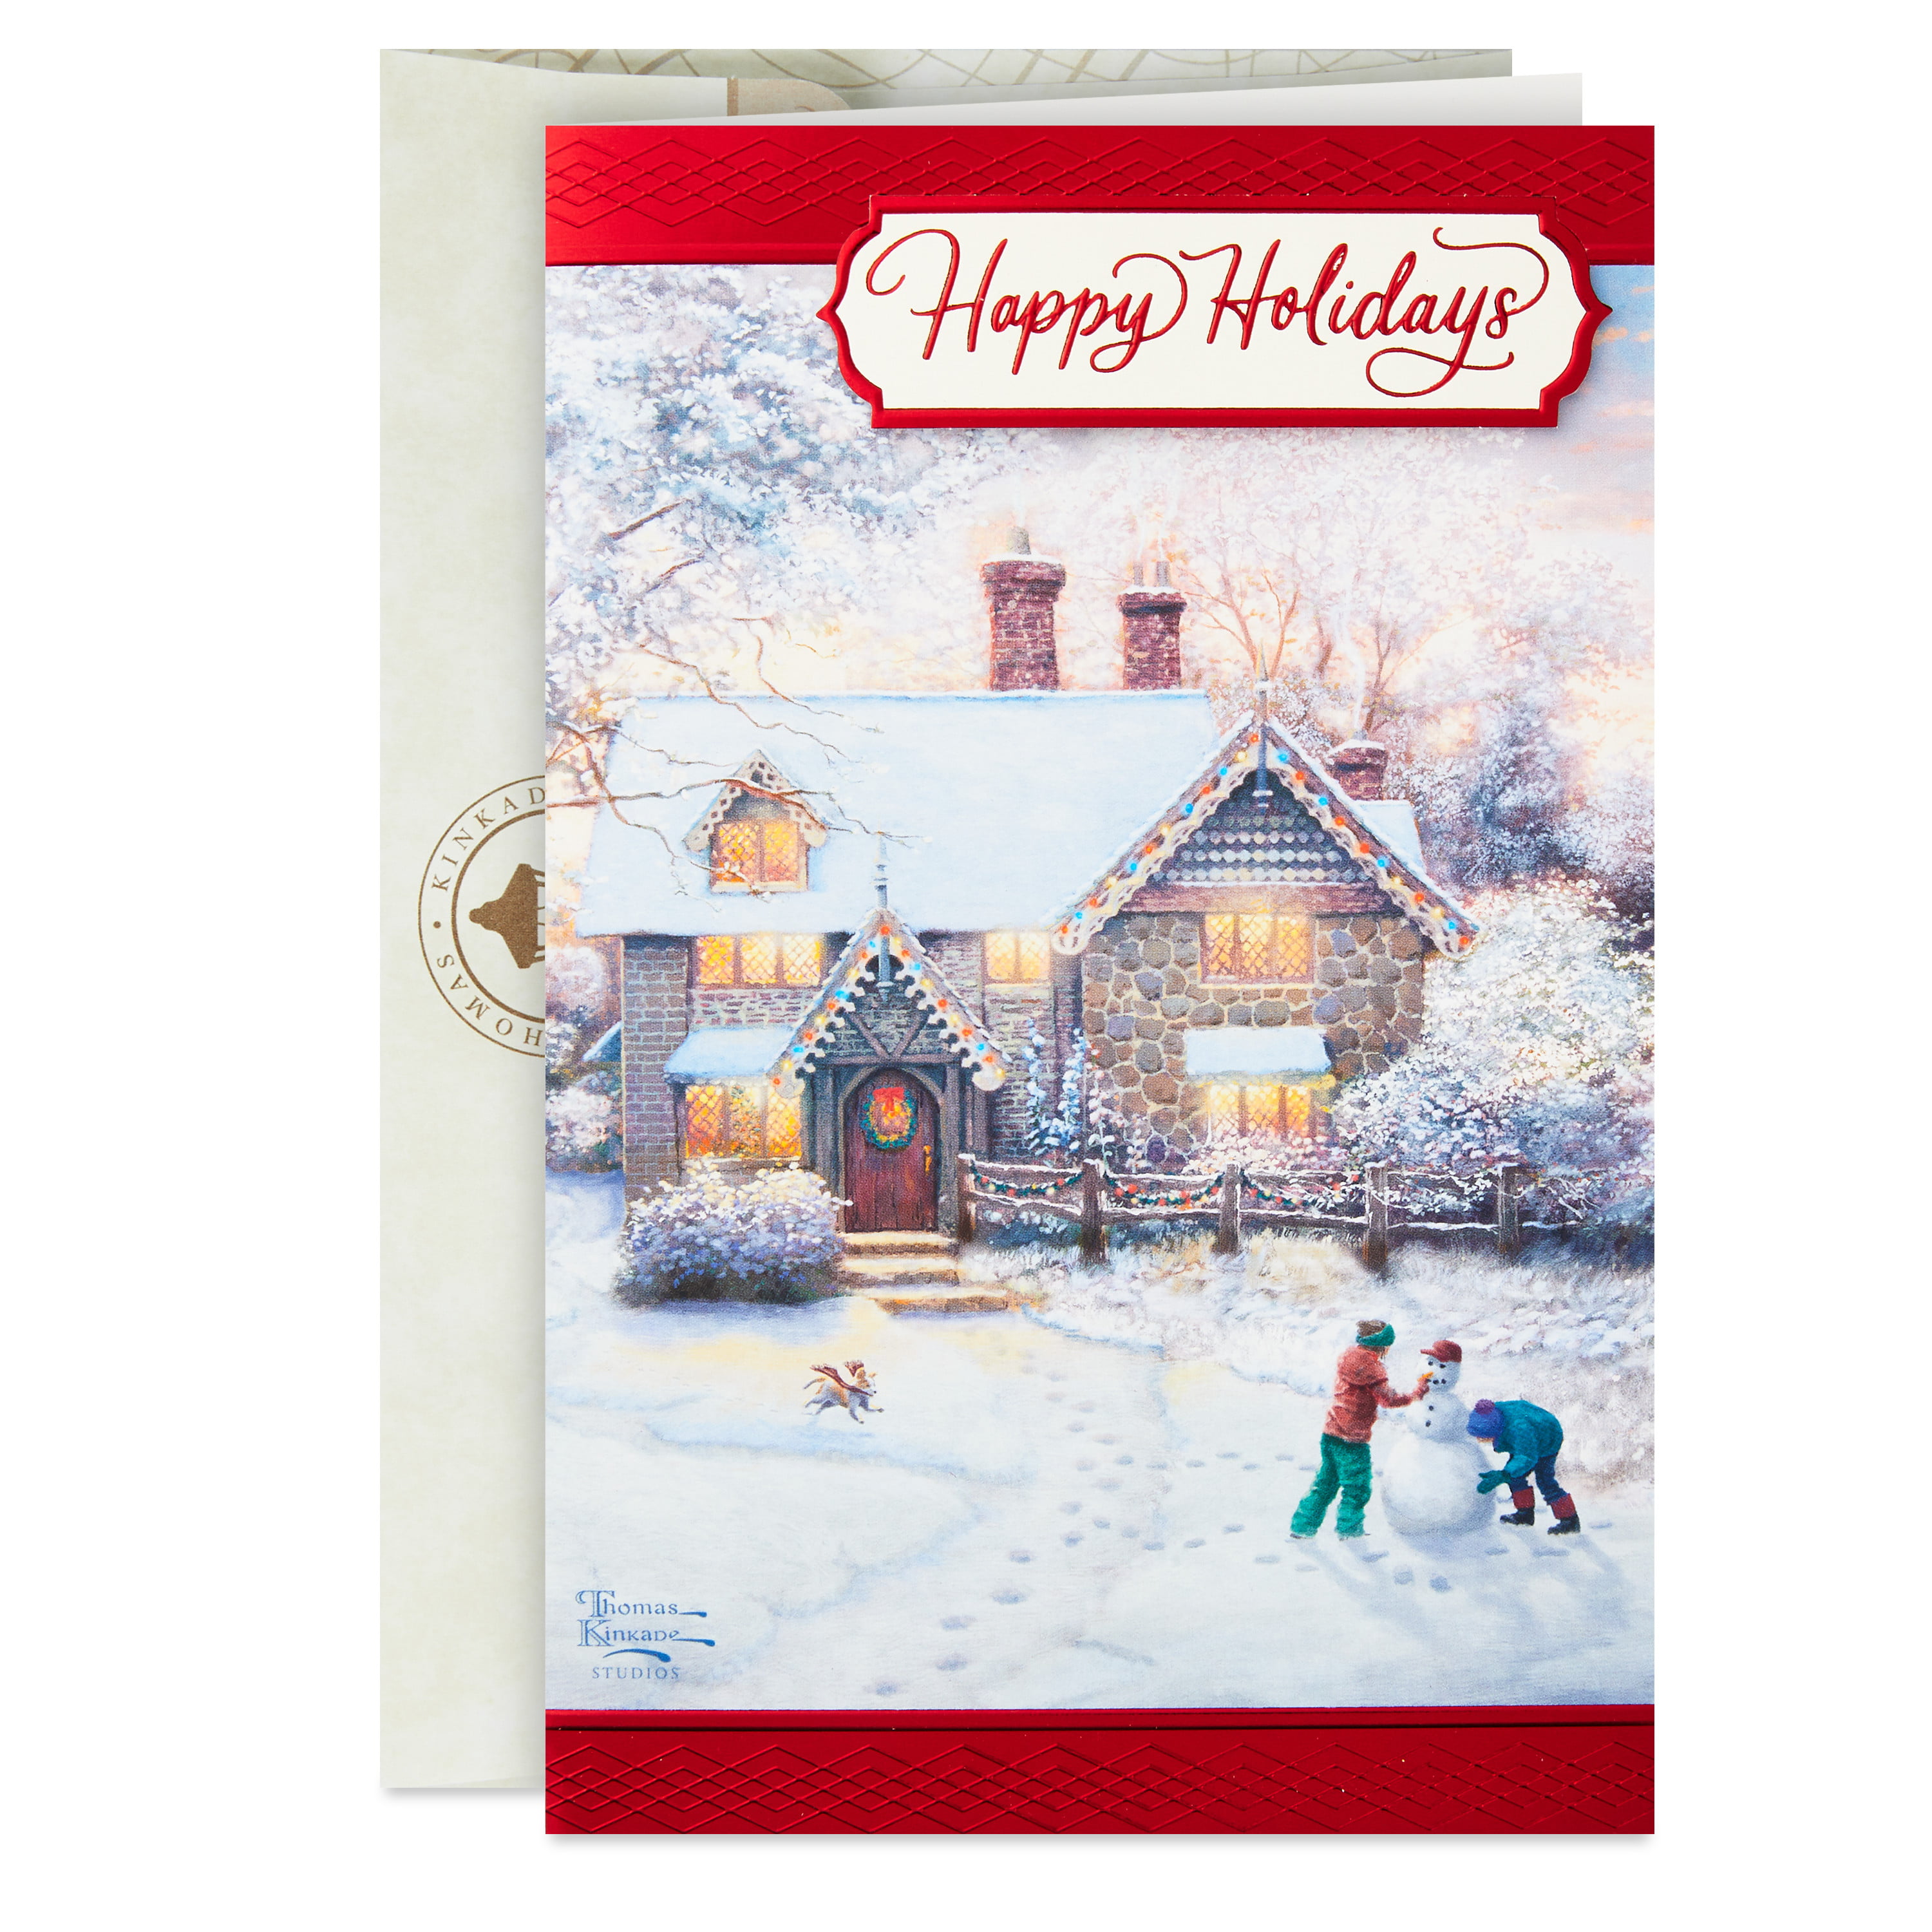 Connections from Hallmark Boxed Christmas Cards—Walmart Exclusive (Thomas Kinkade Gingerbread Cottage), 24 ct. - Walmart.com